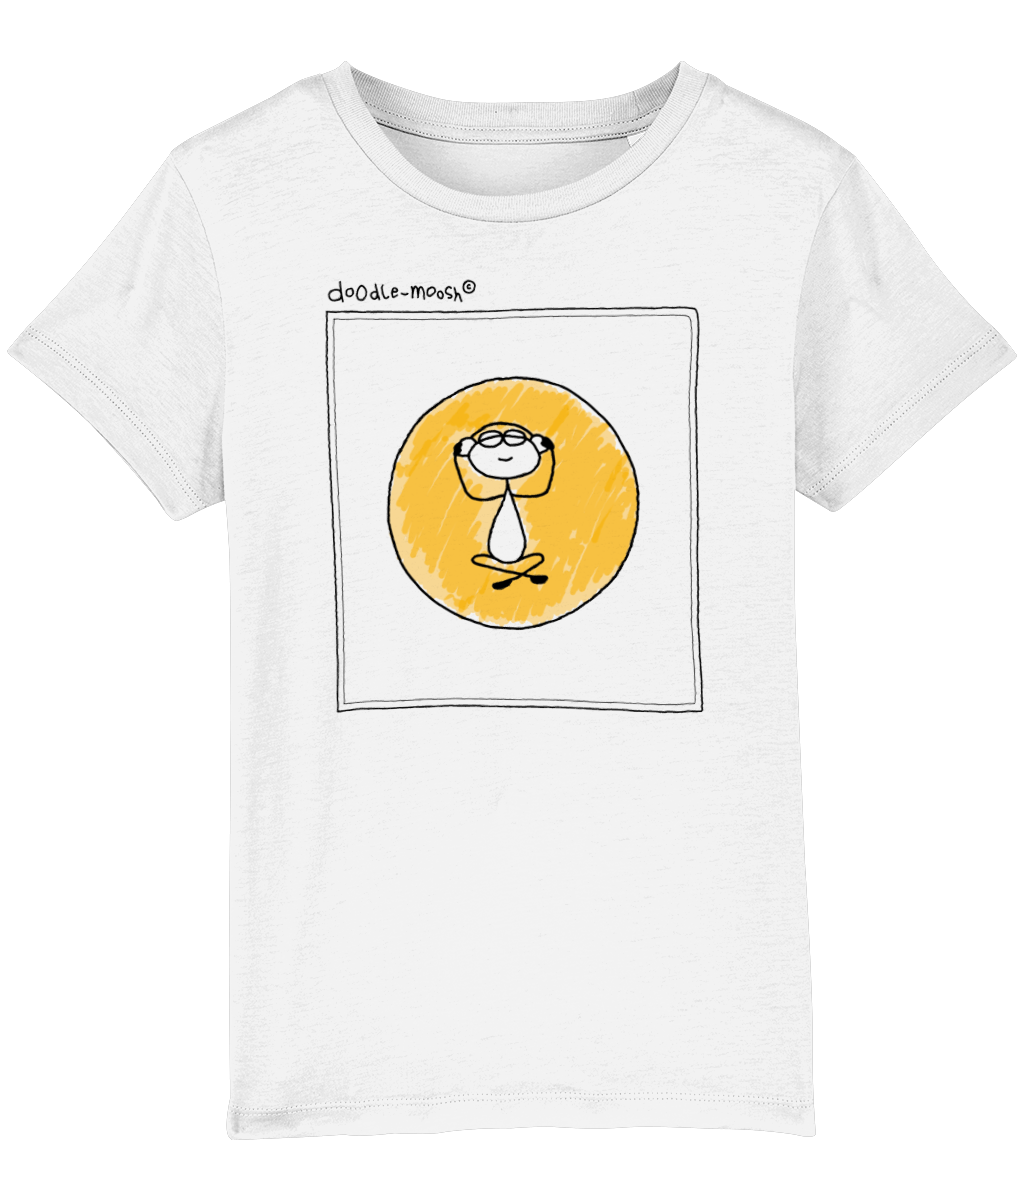 tuned in t-shirt, white with black, colourful  drawing